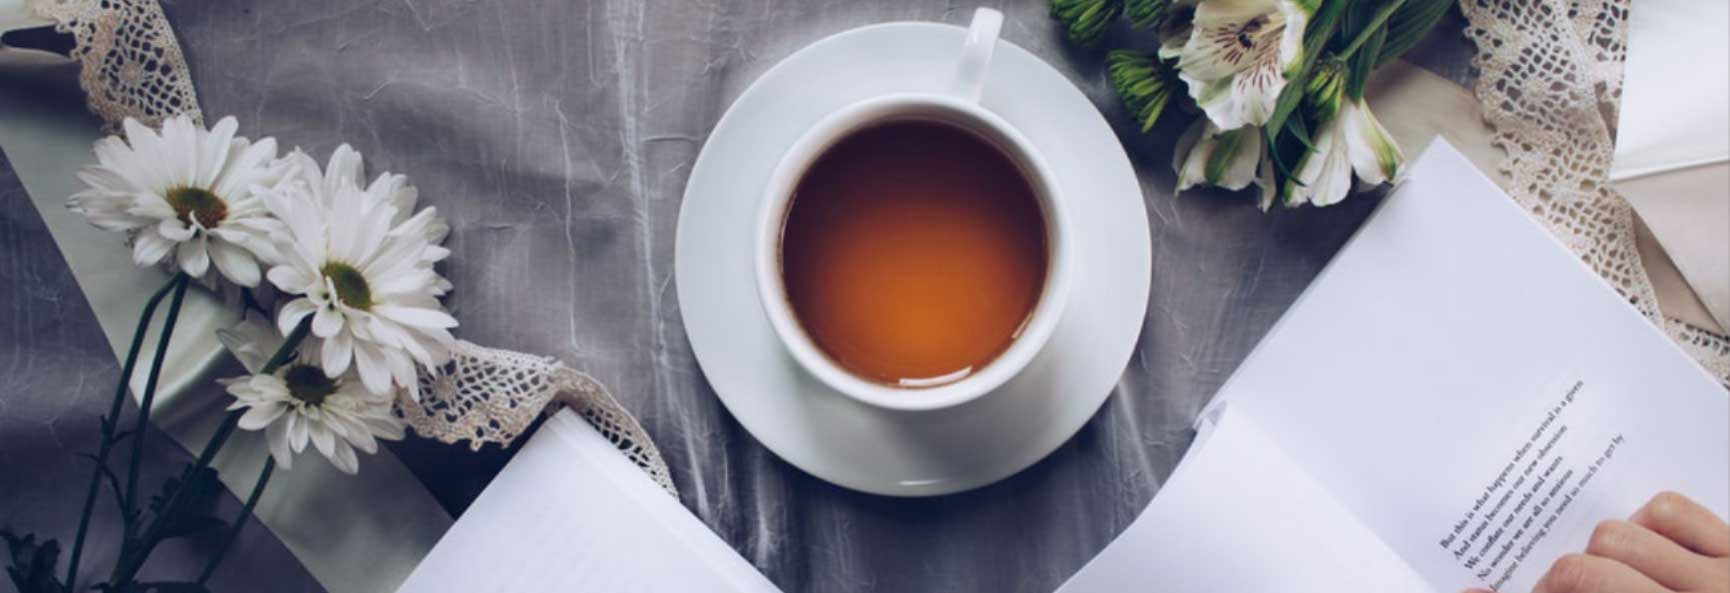 Drinking a cup of tea improves your focus and alertness